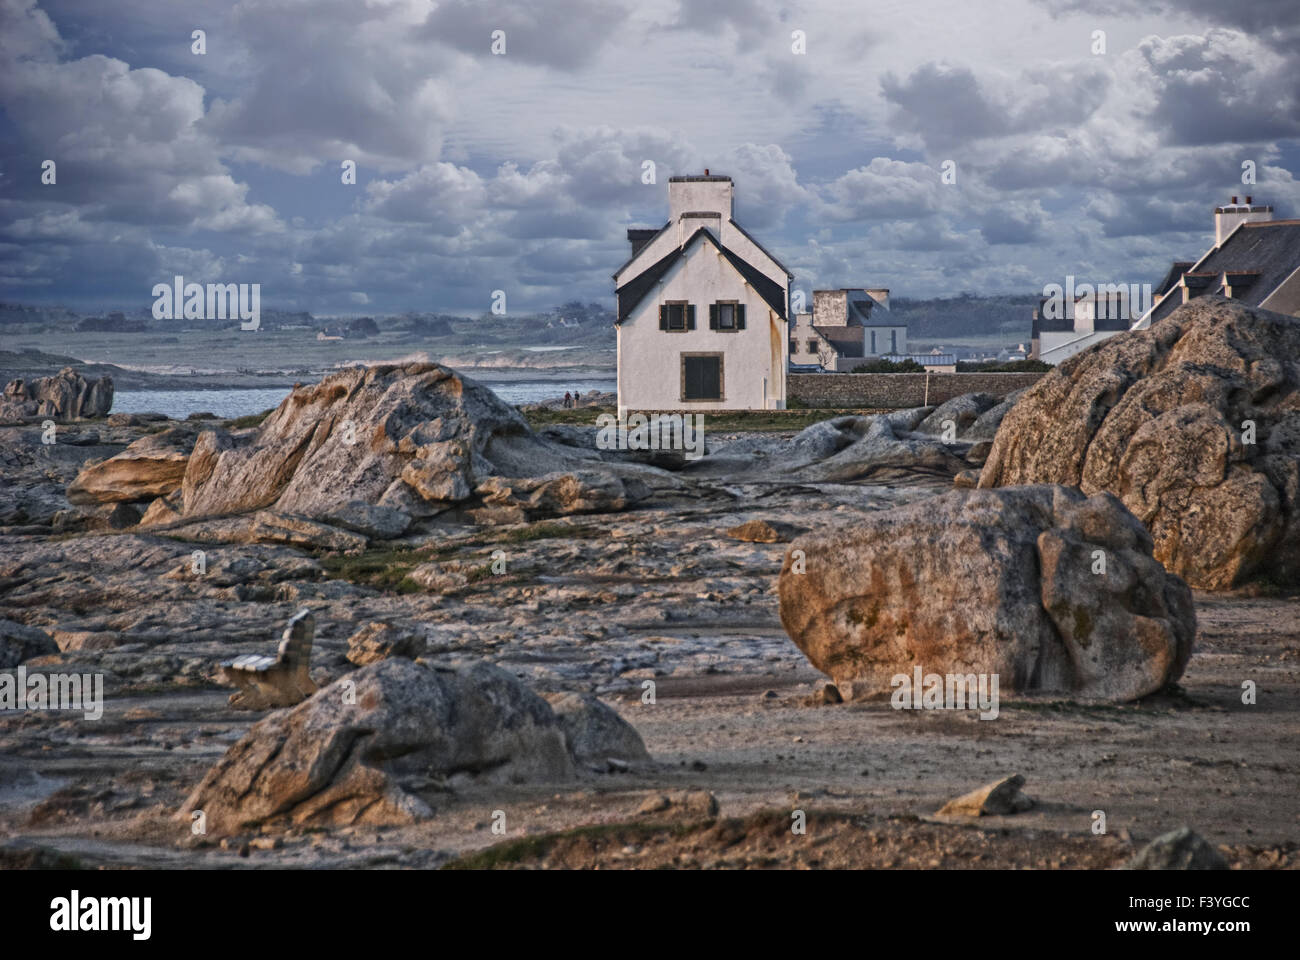 house on the rocks Stock Photo